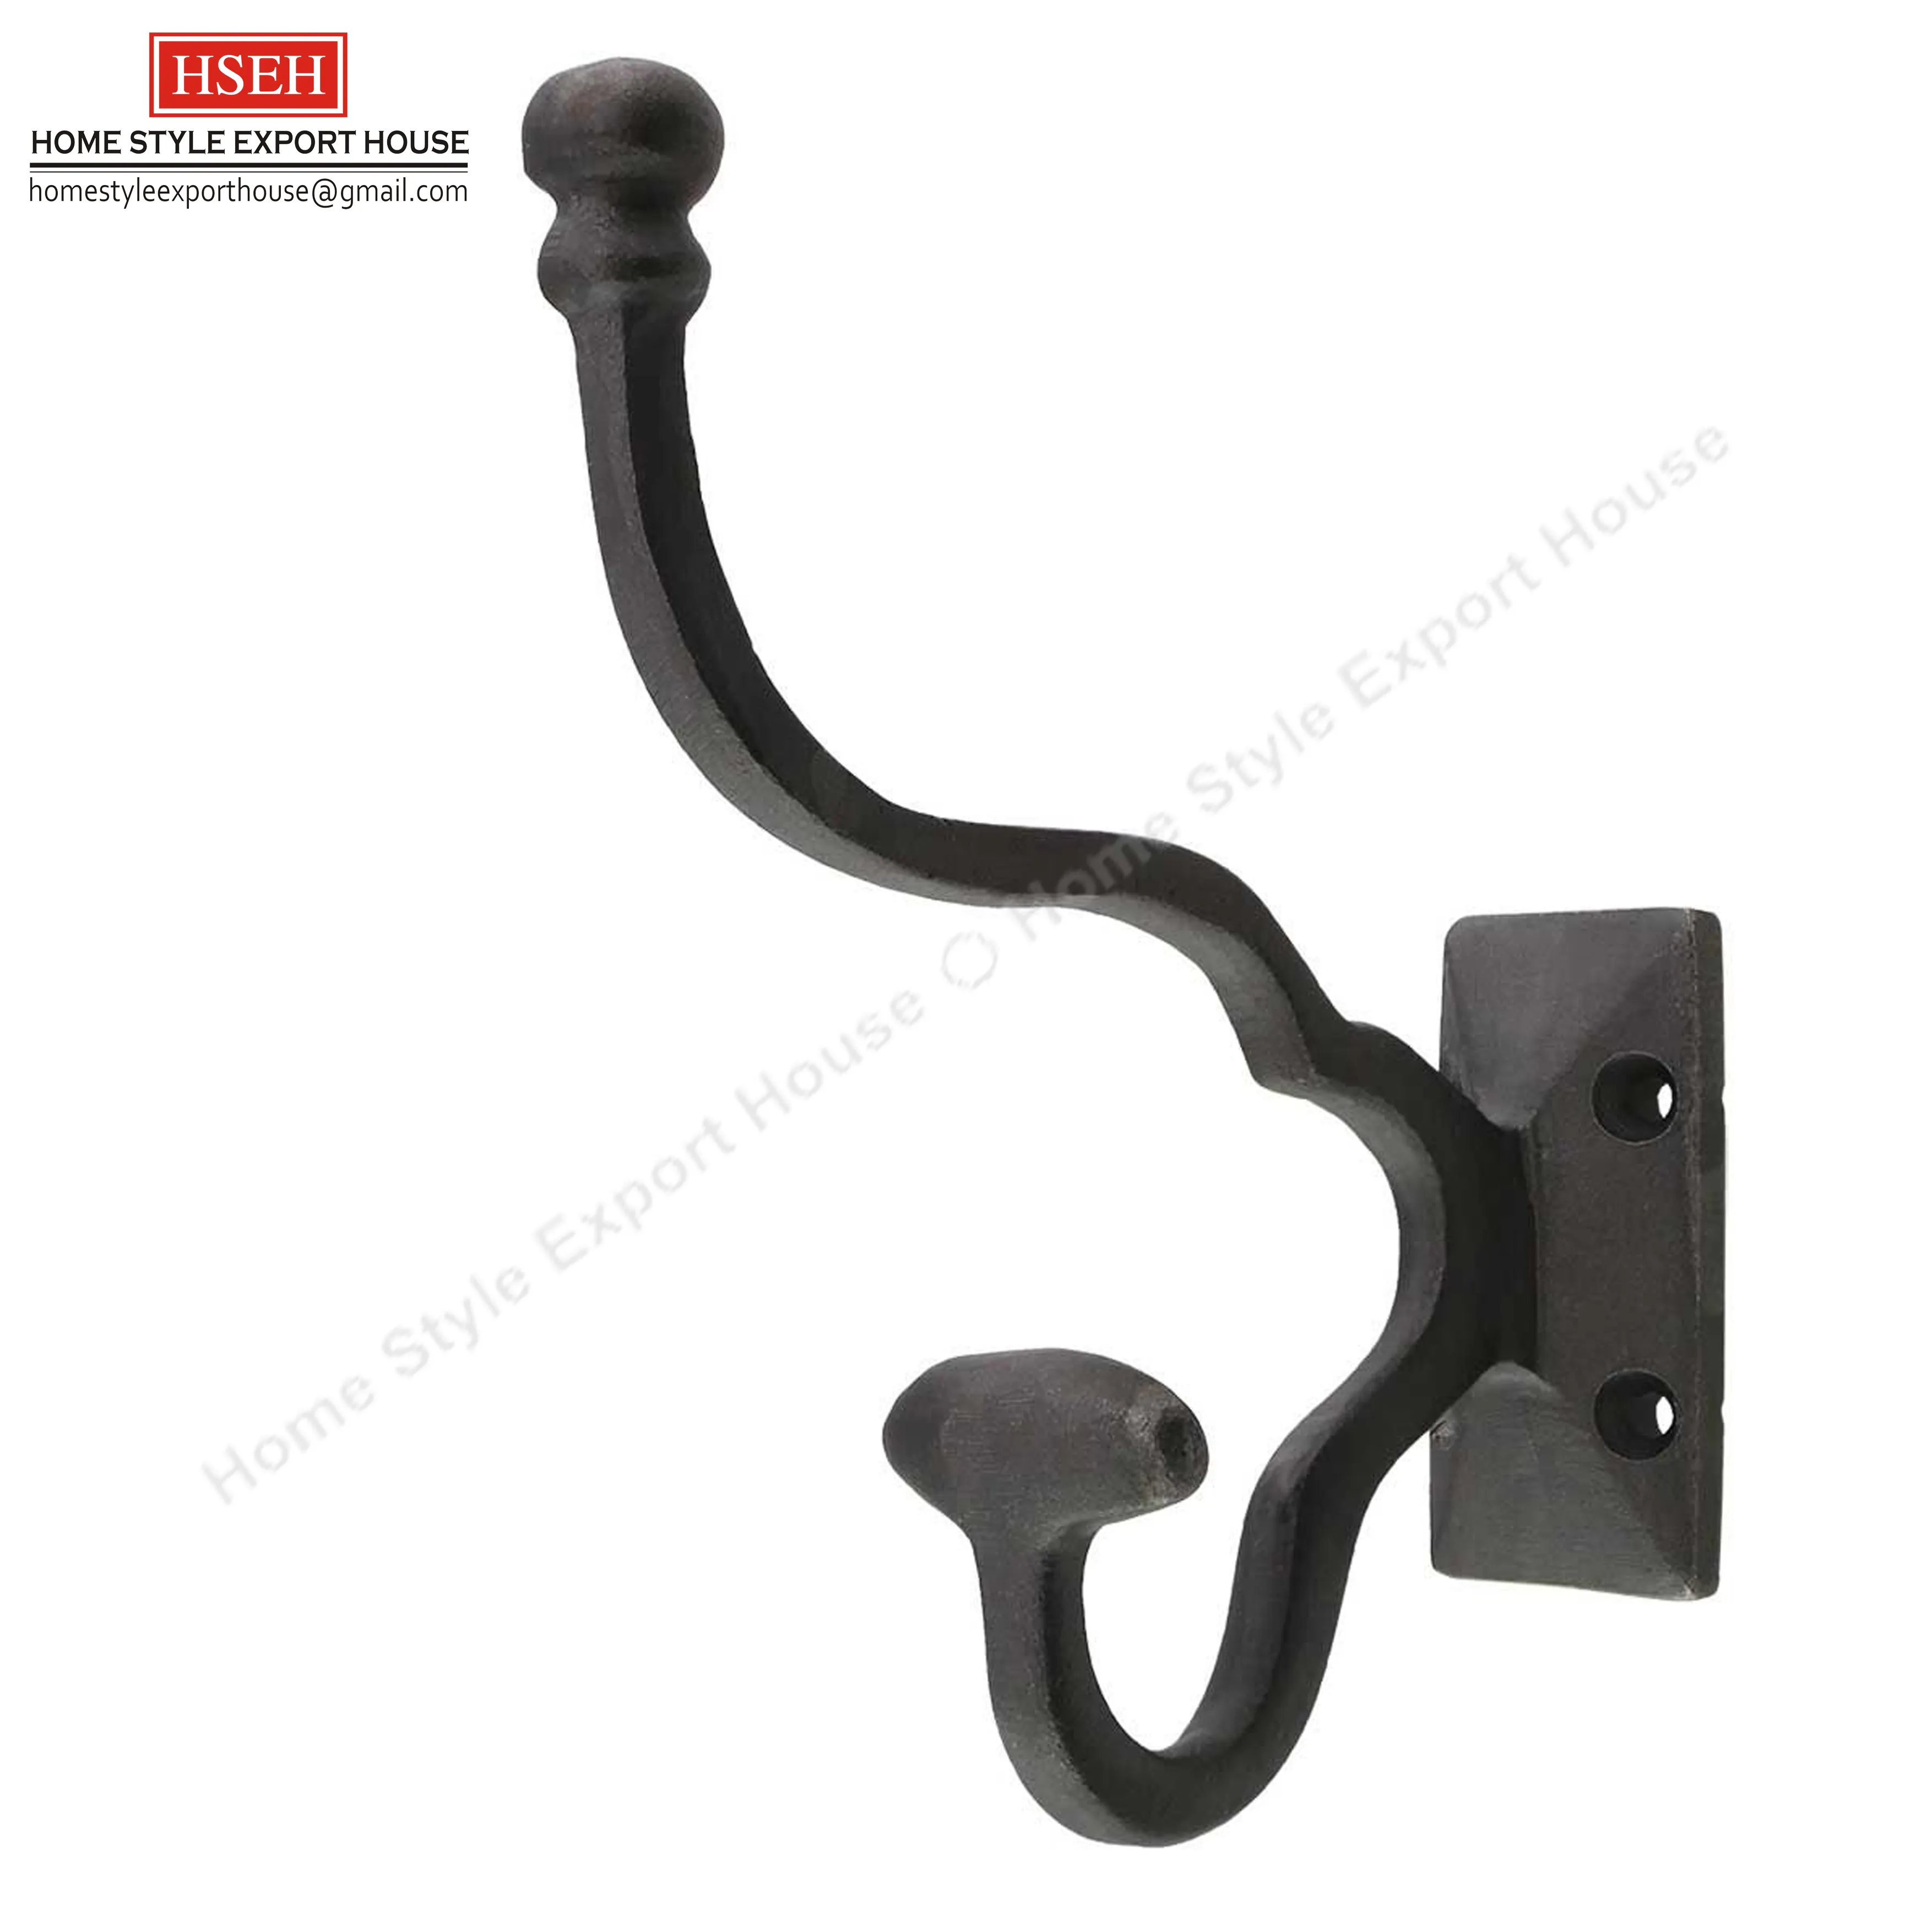 Costal Modern Metal Wall Hooks Wall Decorative Resin Decorative Mounted Metal living room wardrobe Clothes hanger